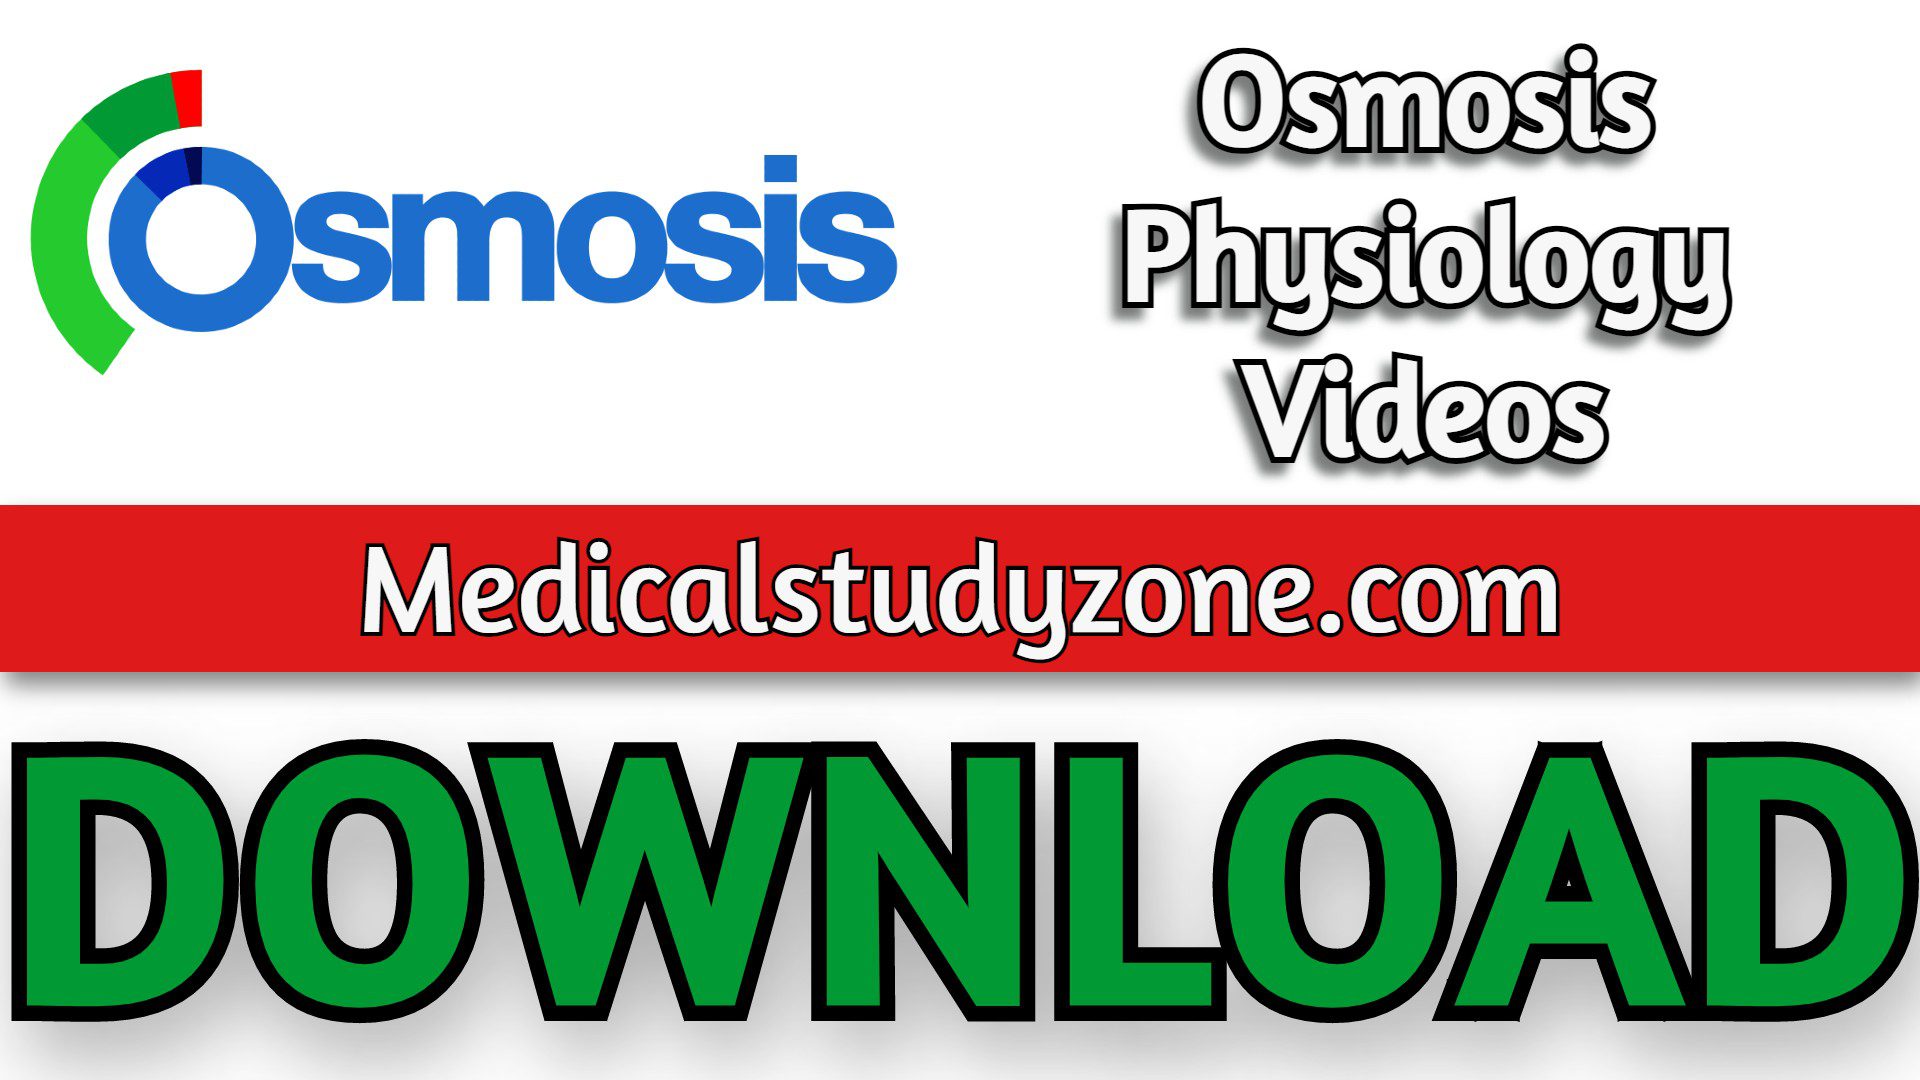 Osmosis Physiology Videos 2021 Free Download